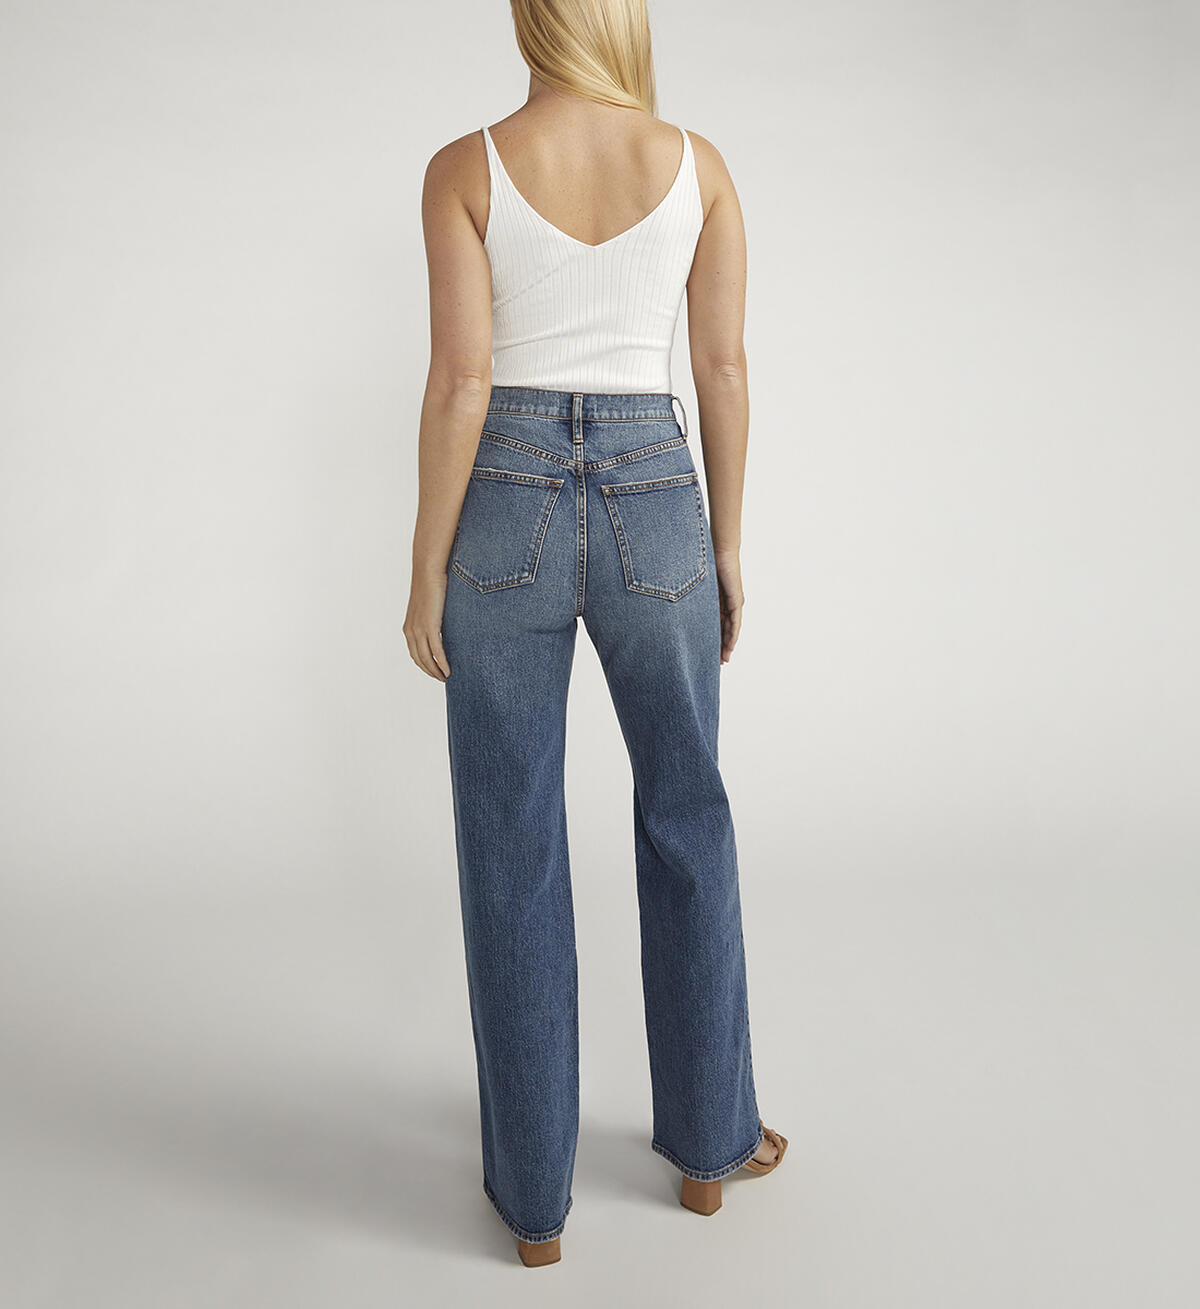 Highly Desirable High Rise Trouser Leg Jeans, , hi-res image number 1